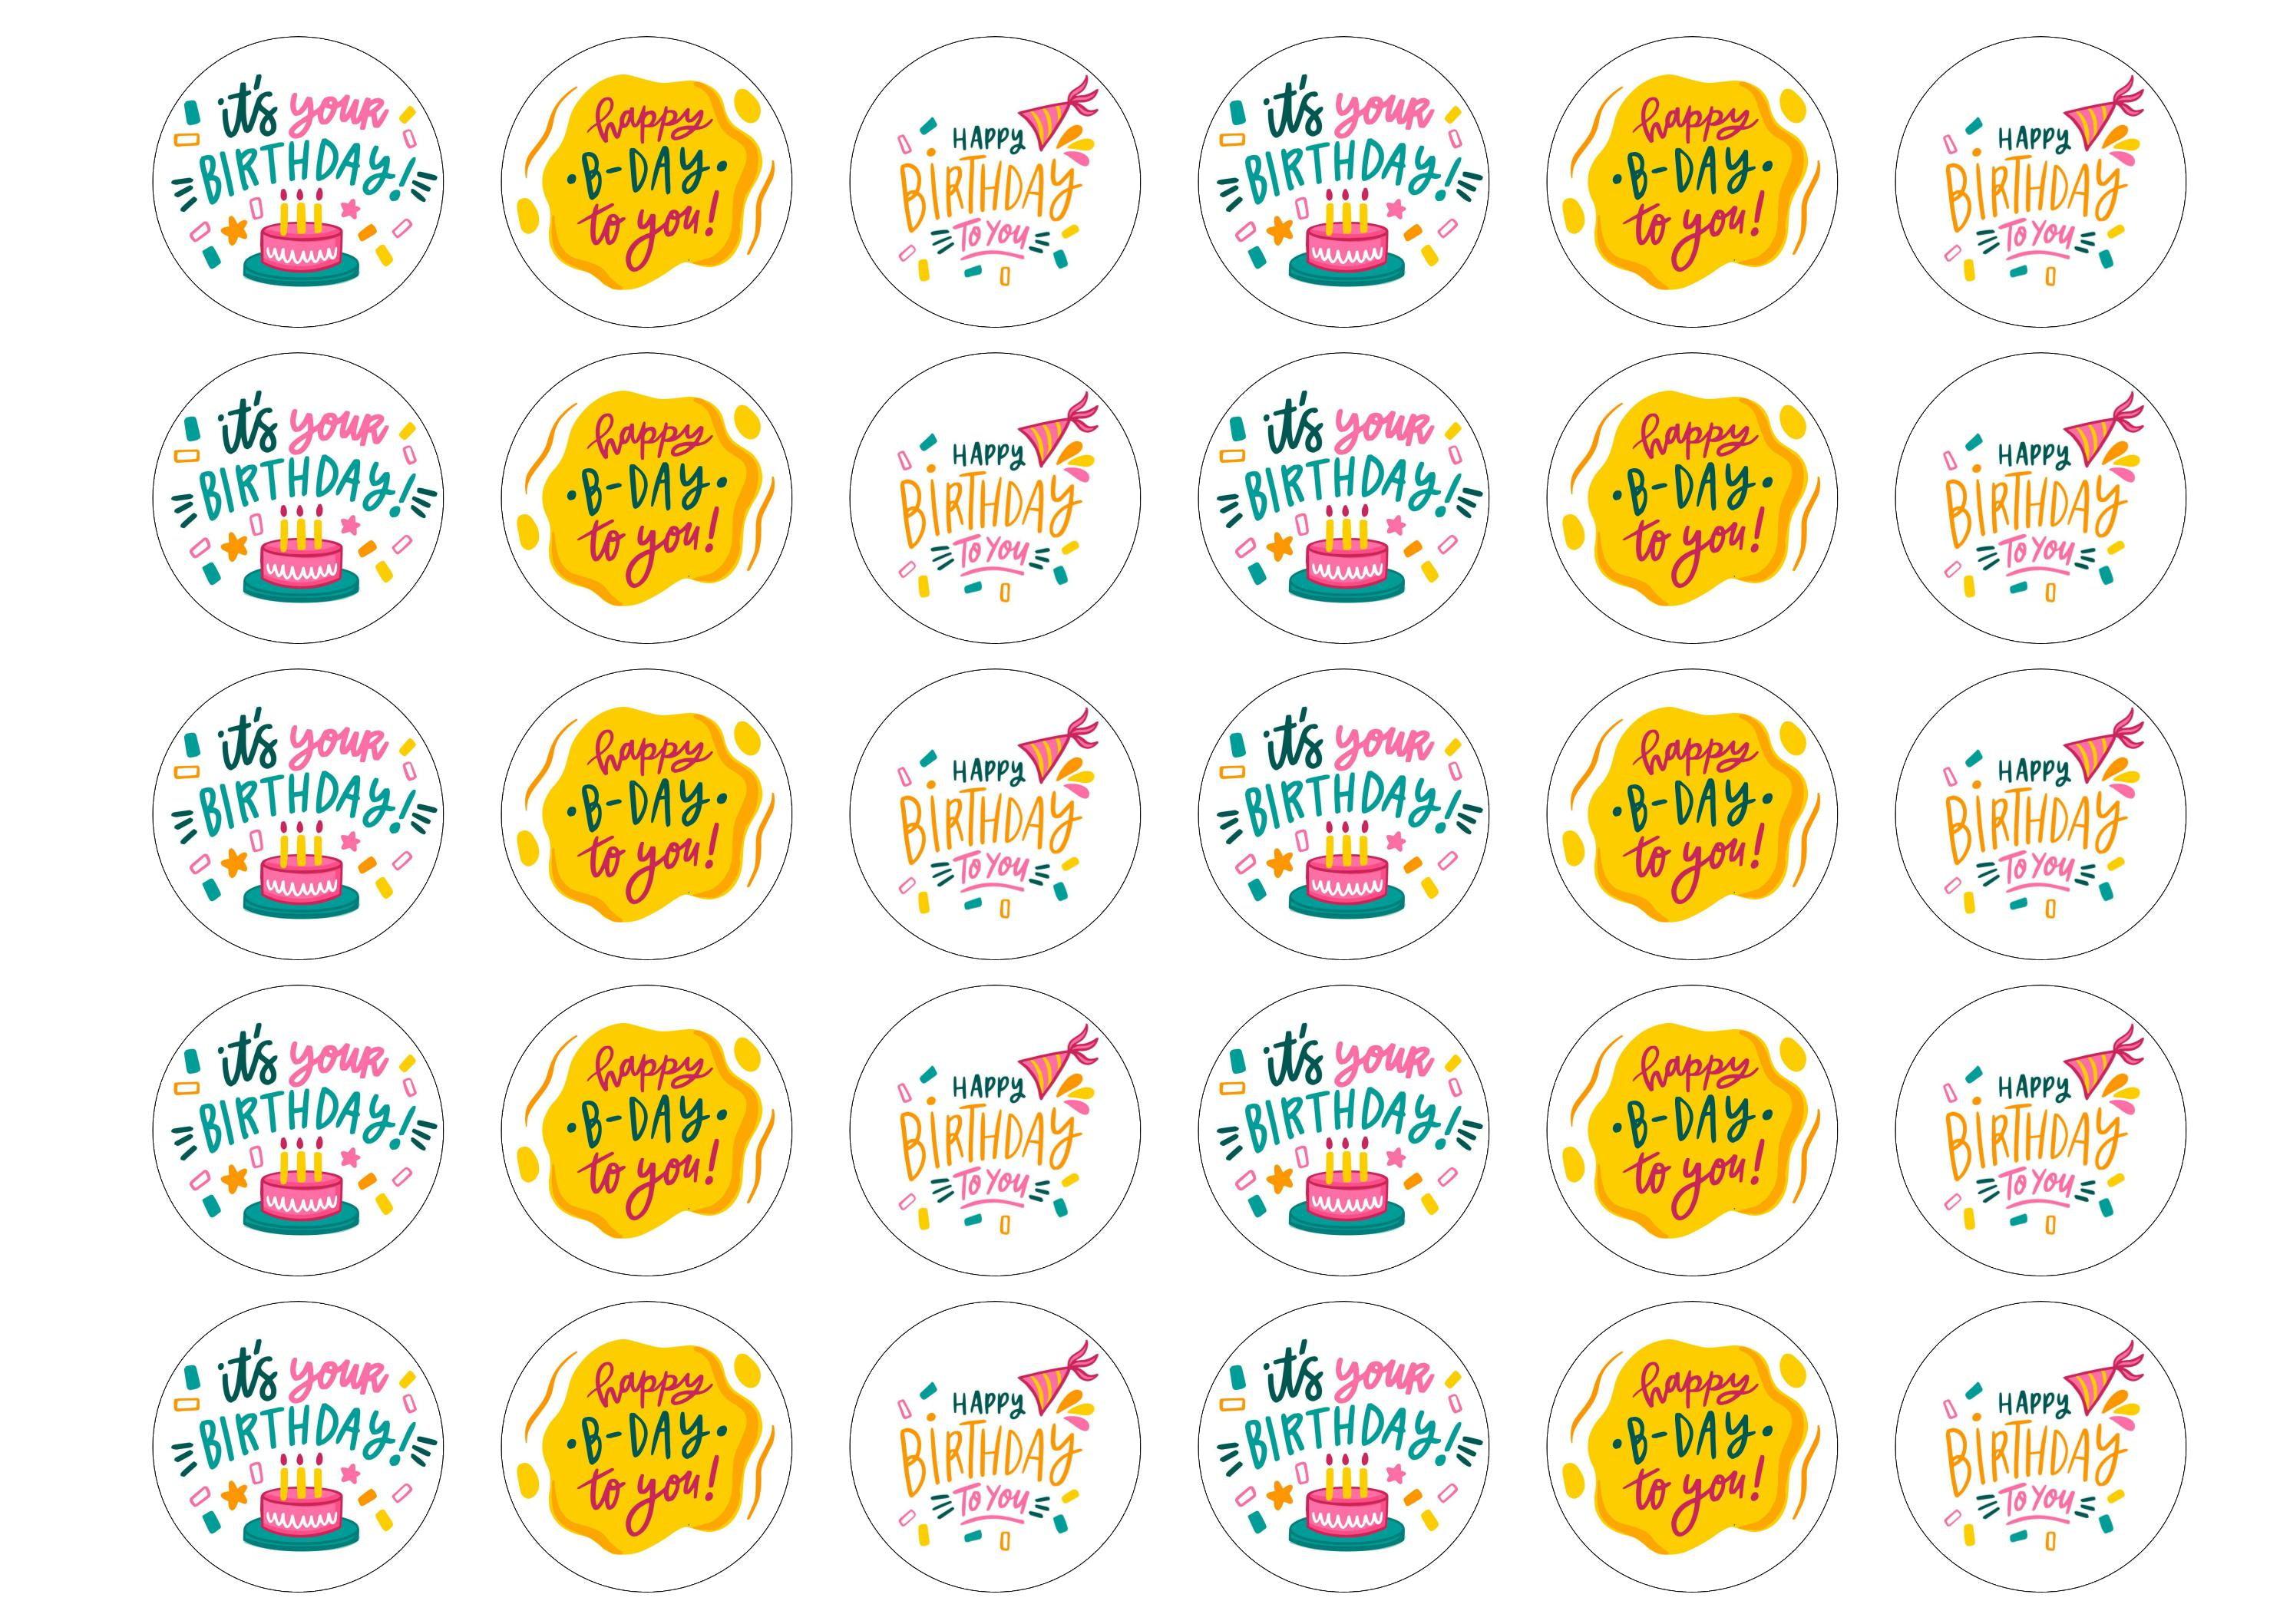 30 edible cupcake toppers with mixed birthday Greetings